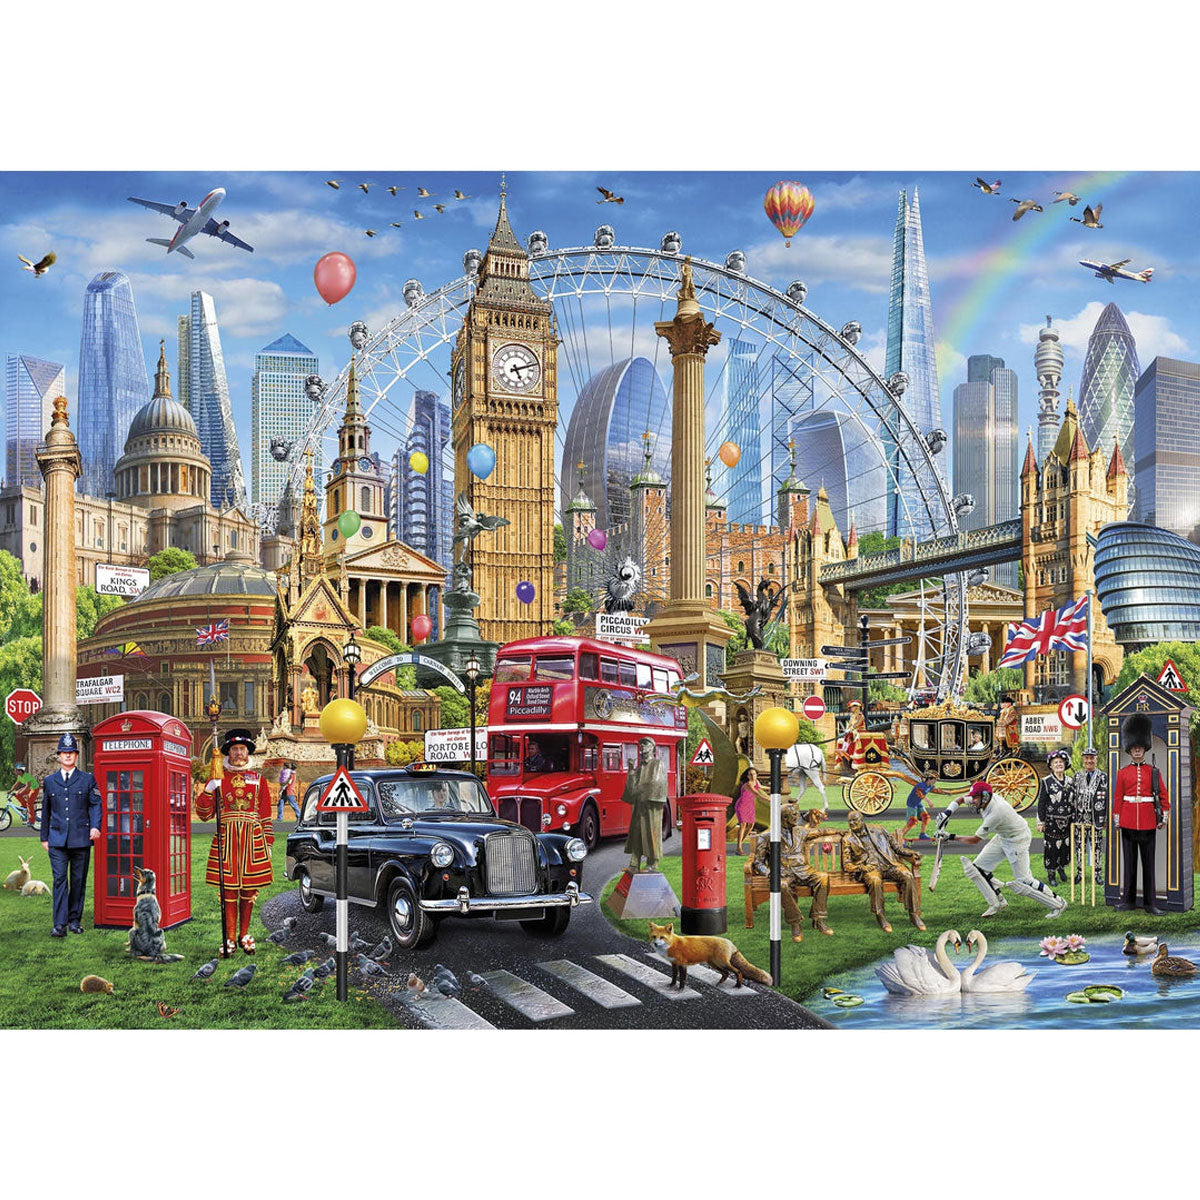 Gibsons London Calling 1000 Piece Jigsaw Puzzle assembled